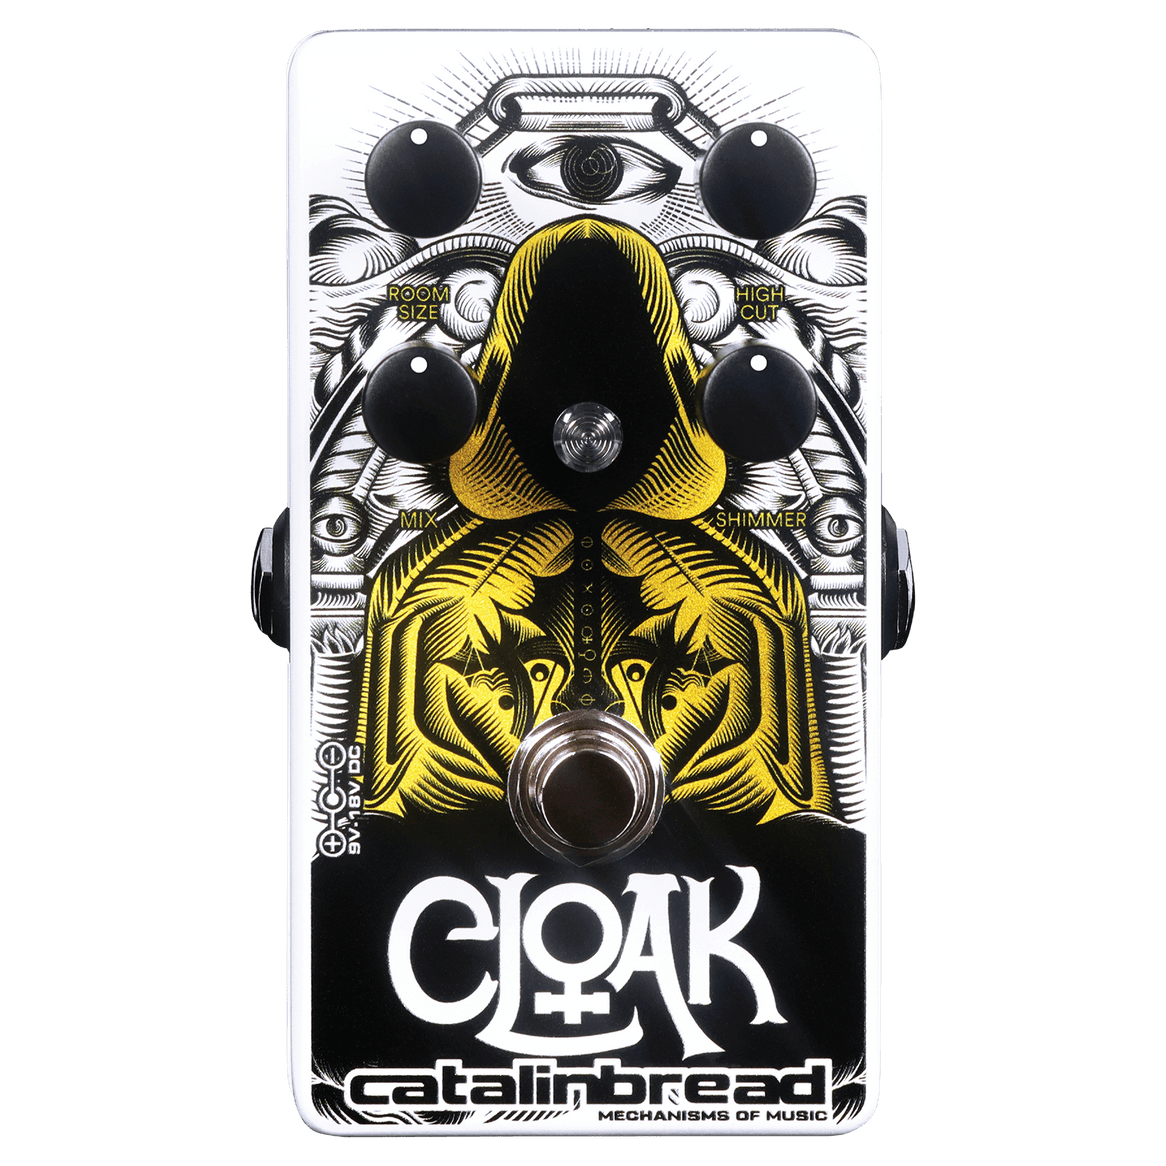 Cloak Reverb and Shimmer